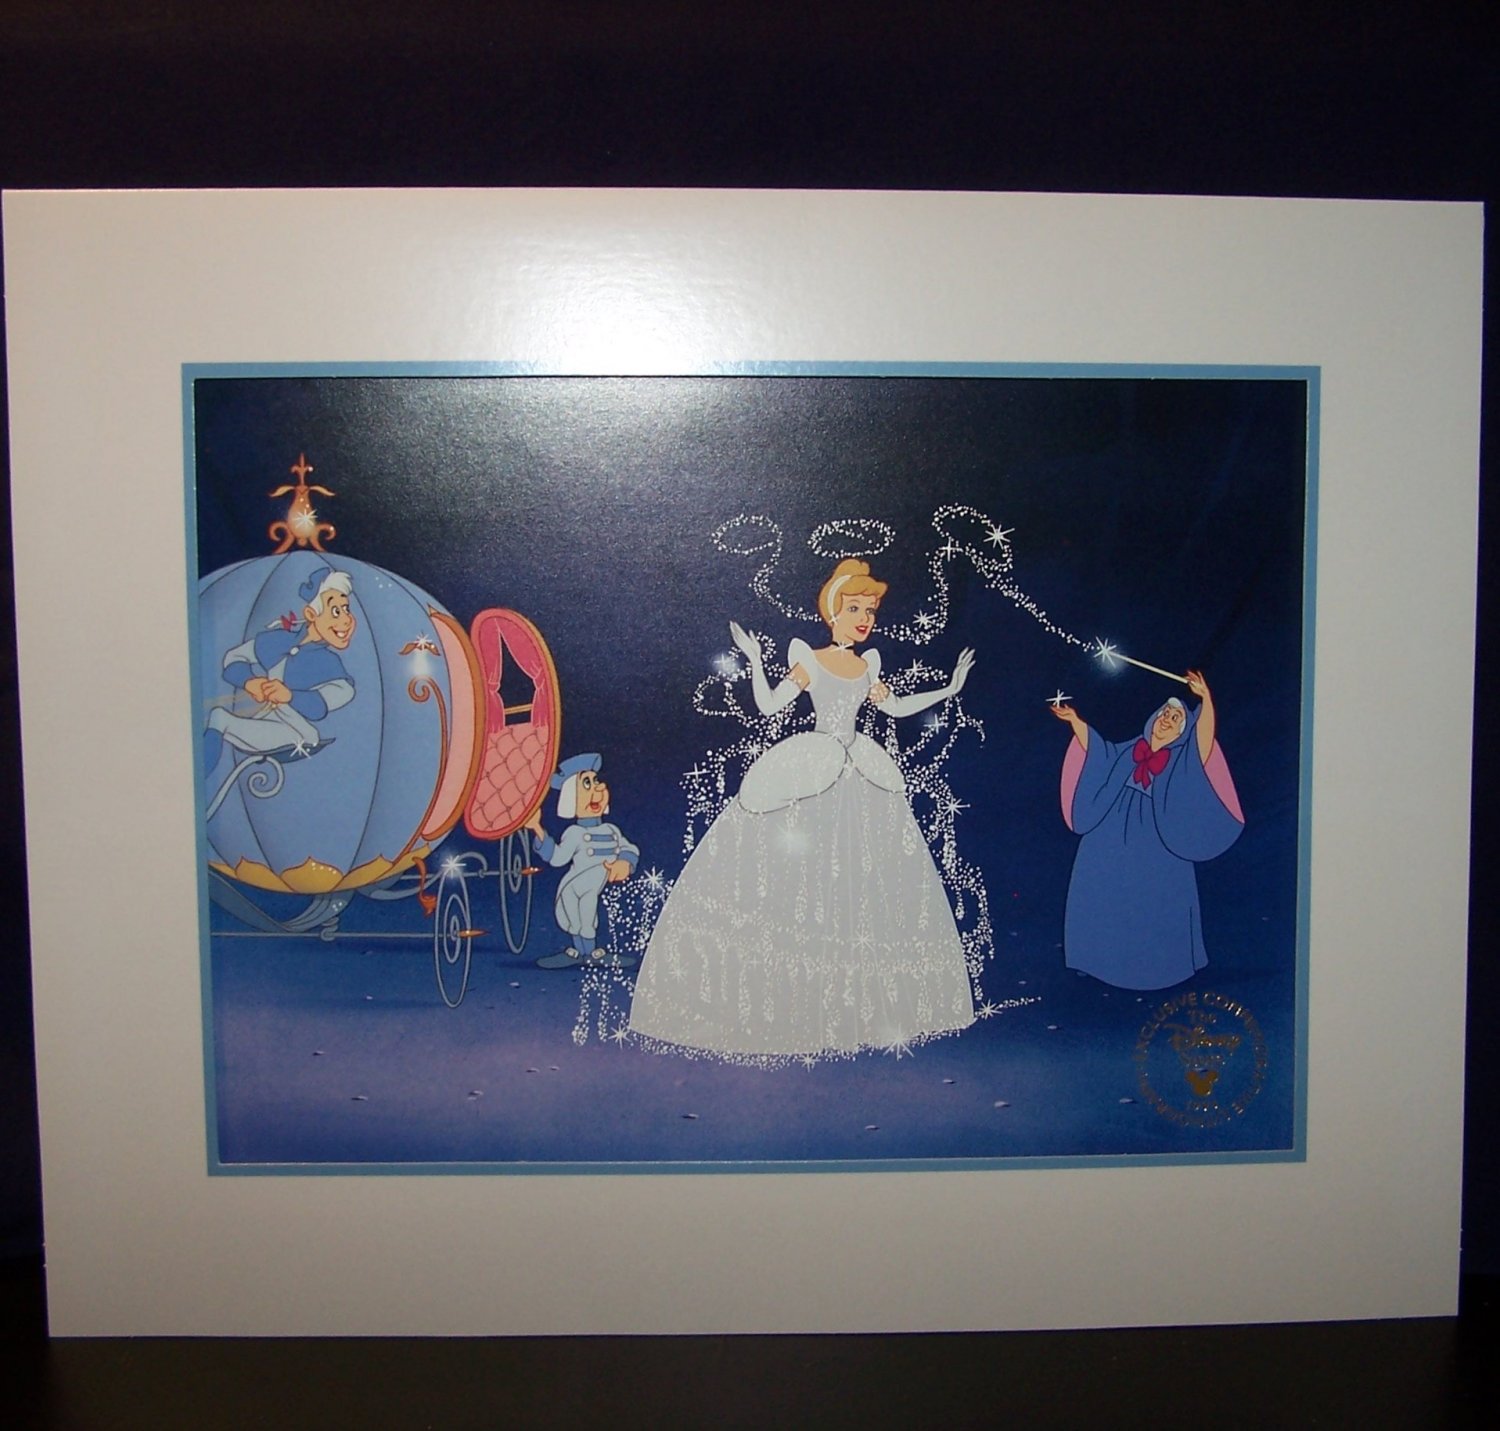 WALT DISNEY'S MASTERPIECE CINDERELLA EXCLUSIVE COMMEMORATIVE LITHOGRAPH Are Disney Lithographs Worth Any Money